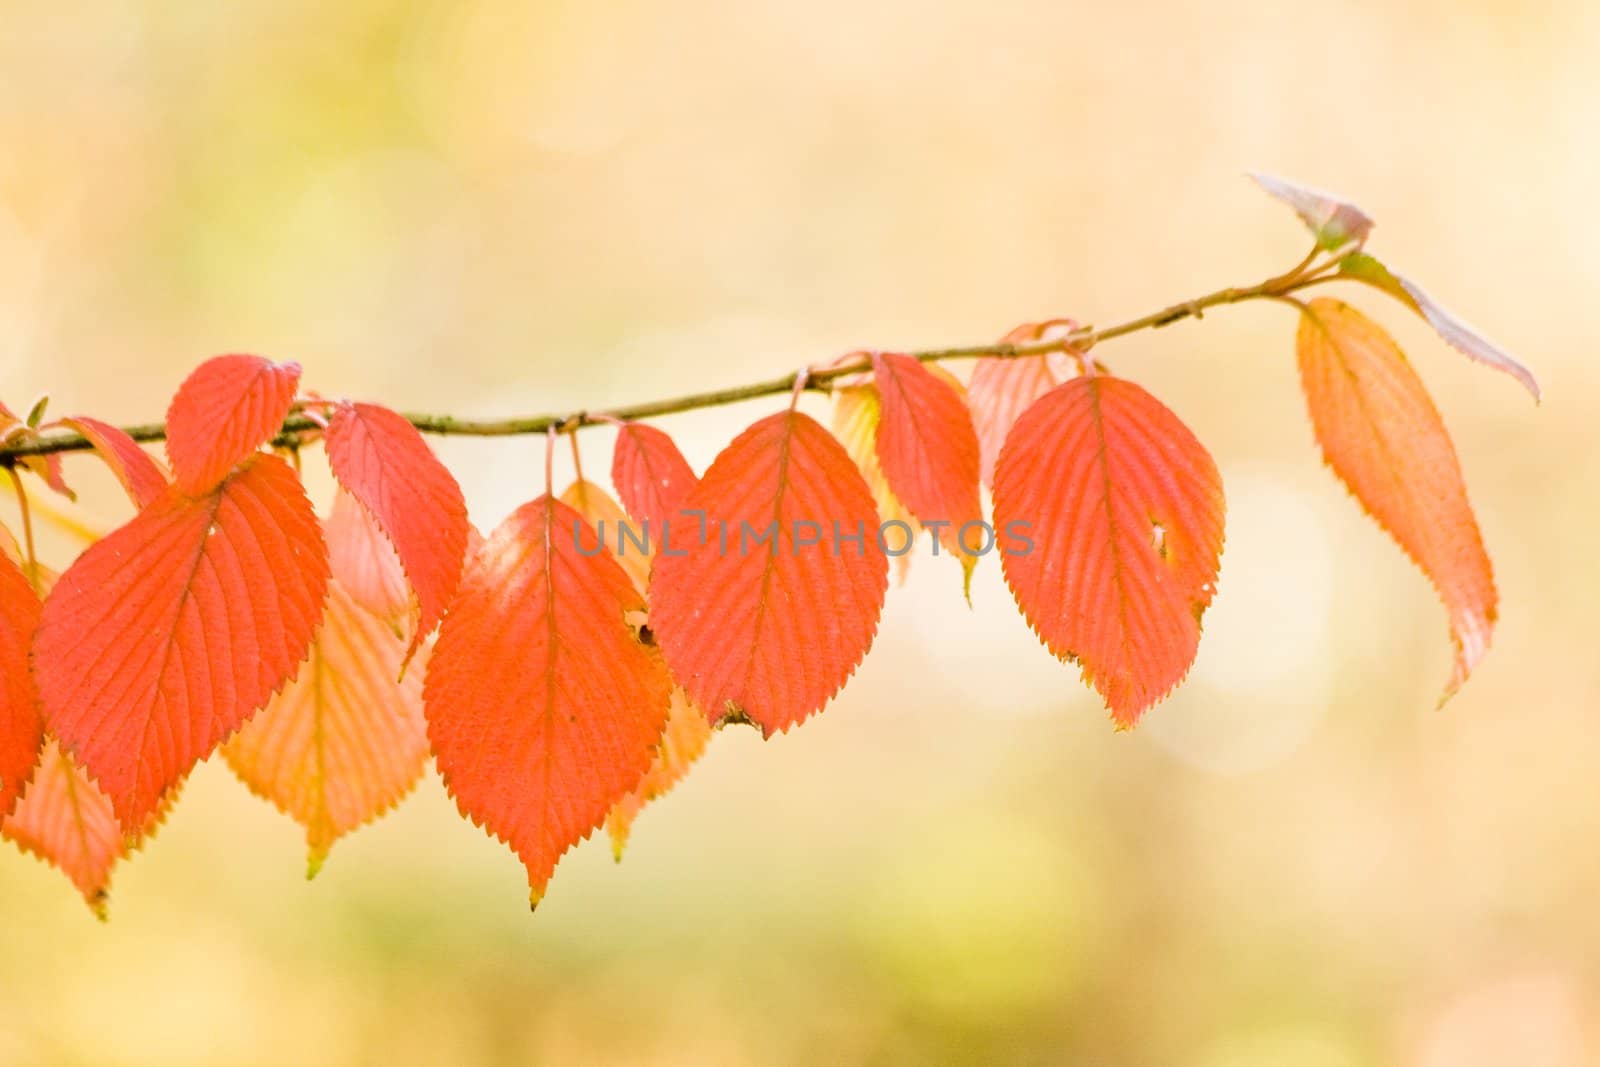 Red leaves on branch of cherry tree in autumn